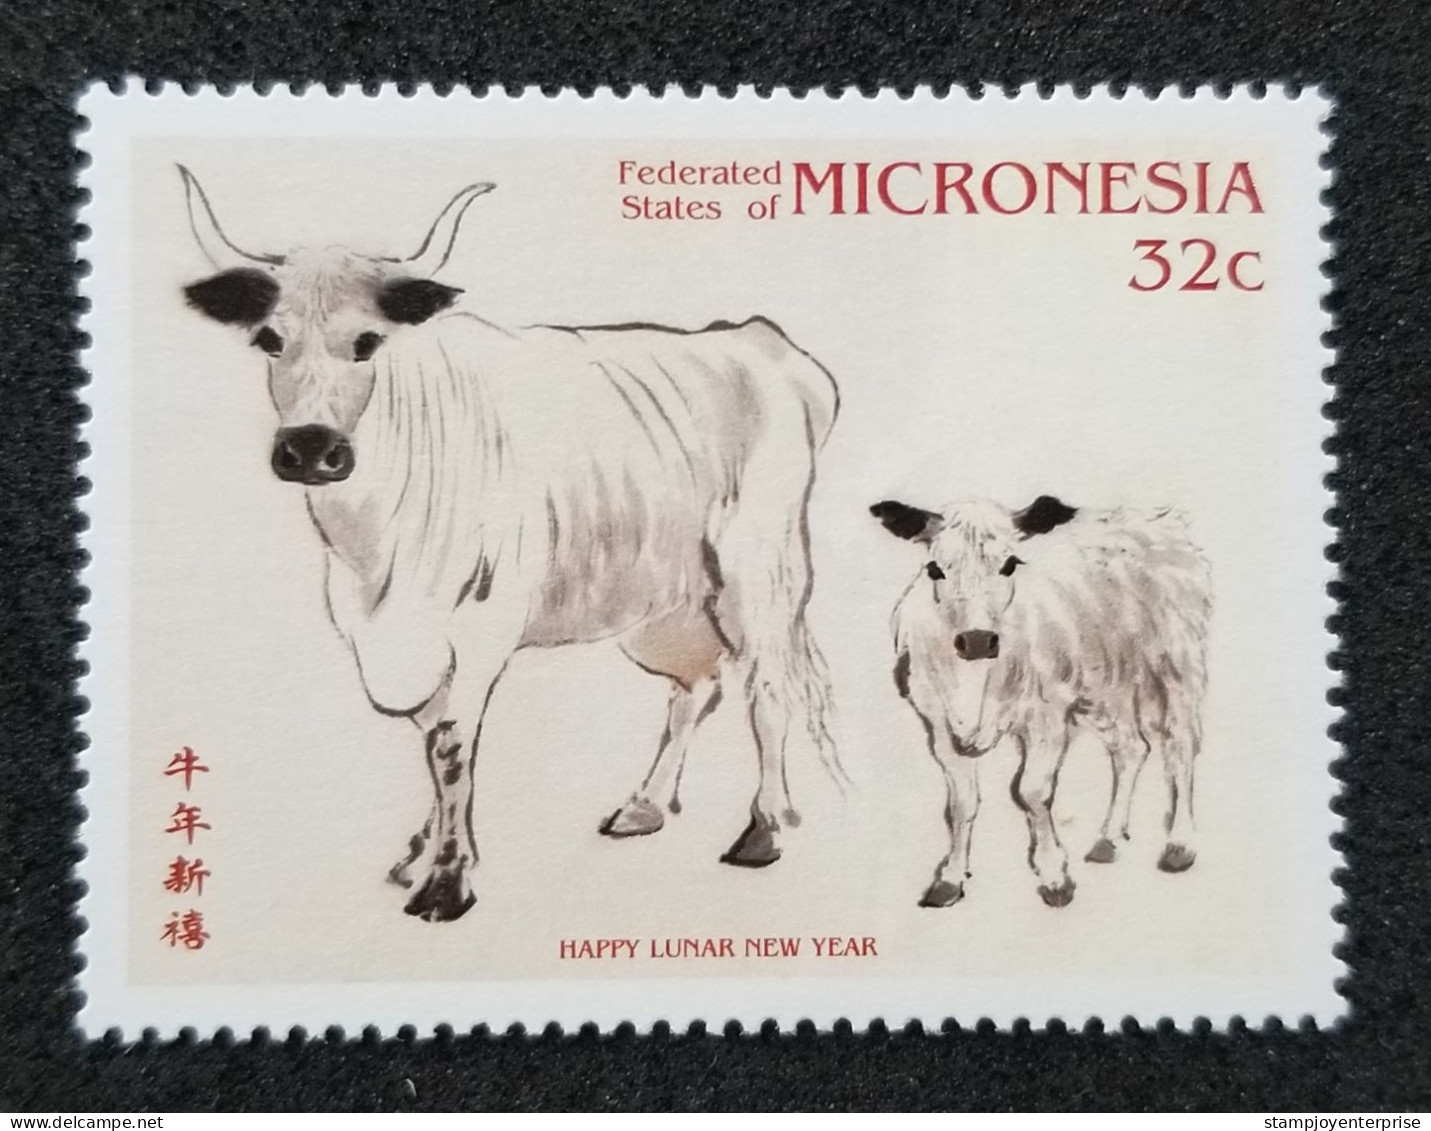 Micronesia Year Of The Ox 1997 Chinese Ancient Painting Cow Lunar Zodiac (stamp) MNH - Micronesia